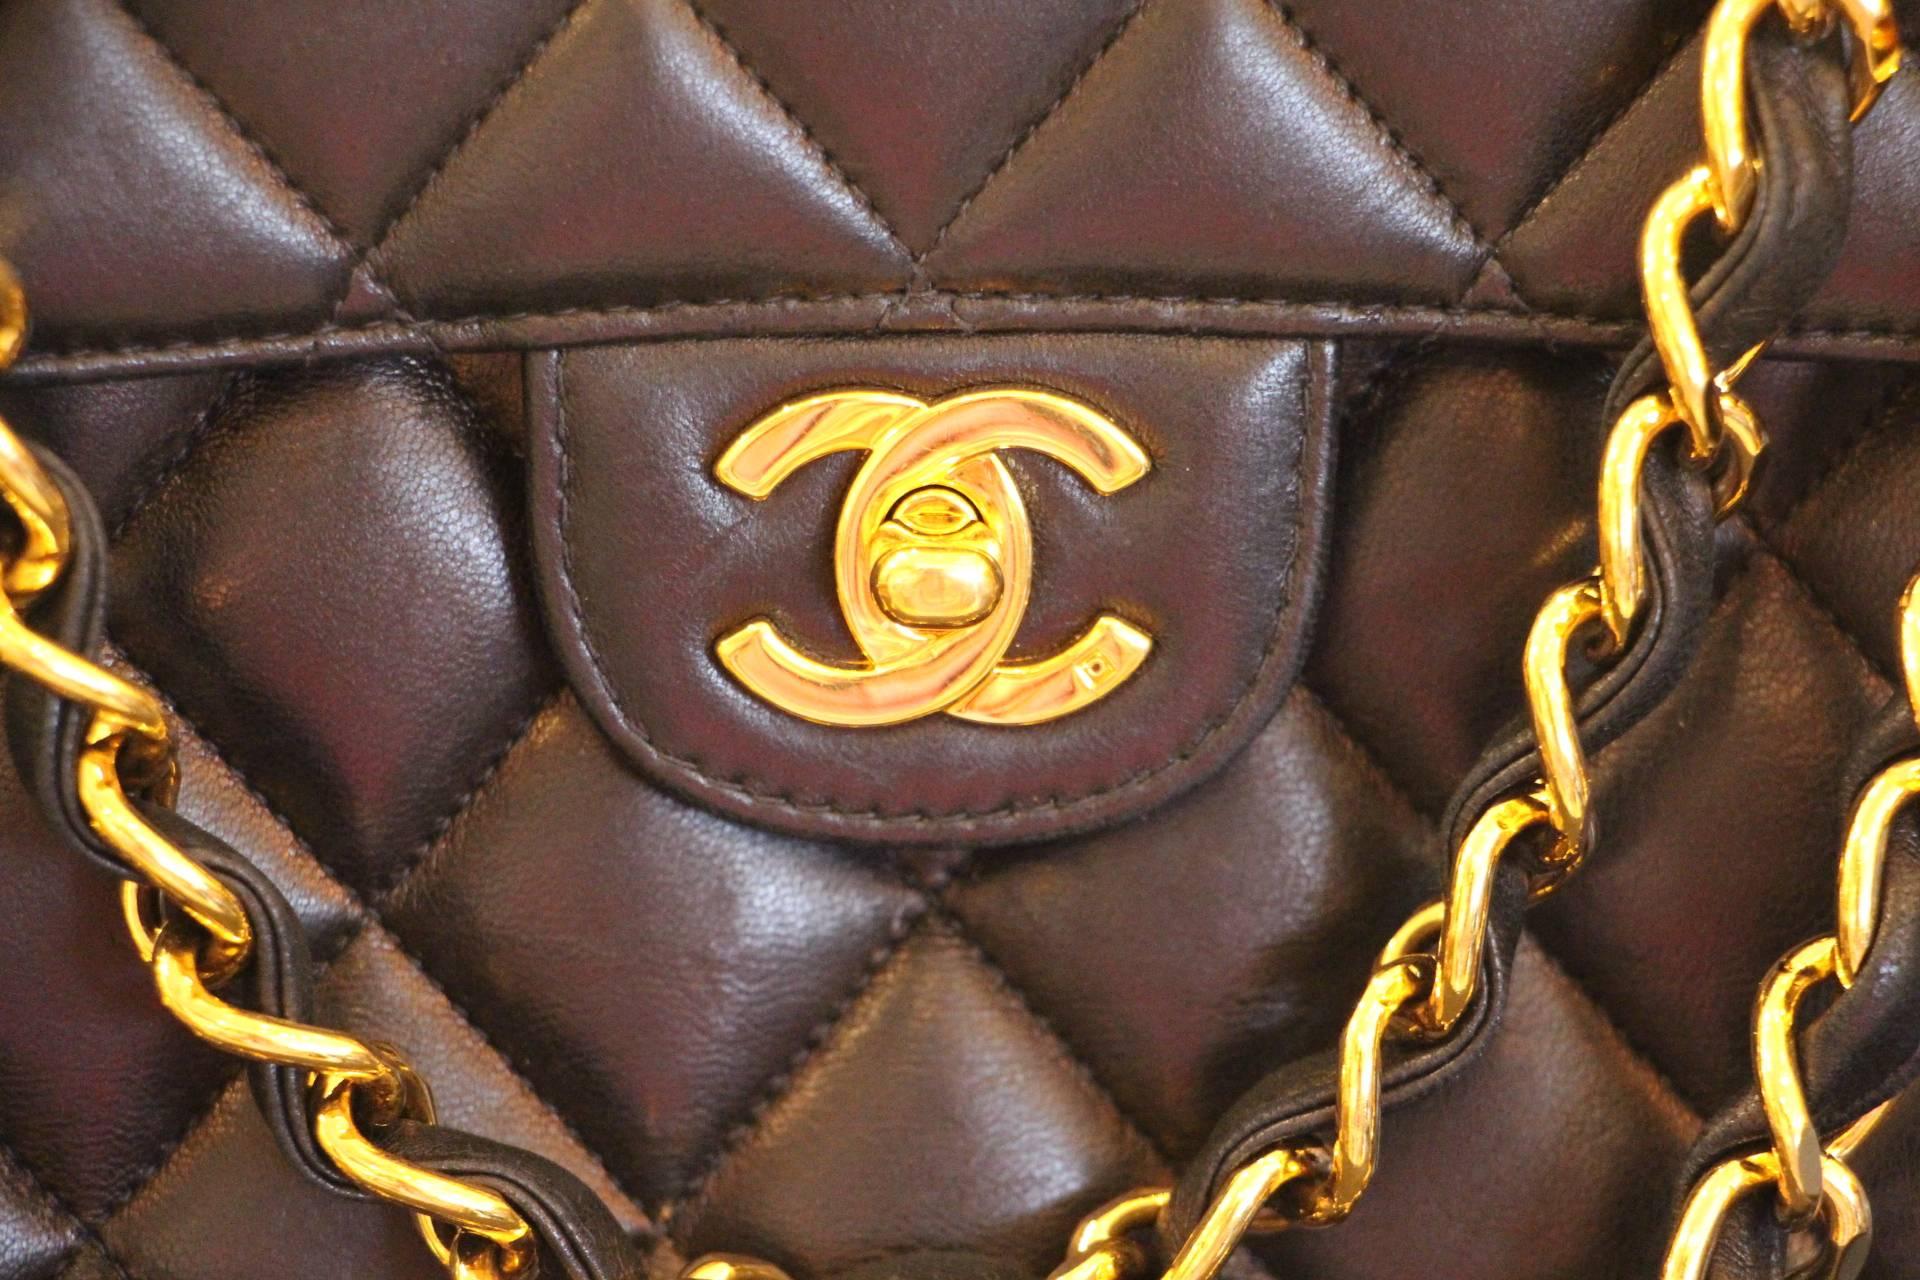 An iconic Chanel Jumbo Flap Bag made of a soft black lambskin leather with bright gold tone hardware.
The classic Chanel chain with goldtone chain links interwoven with black lambskin leather can be worn single or double. Double chain measuring a